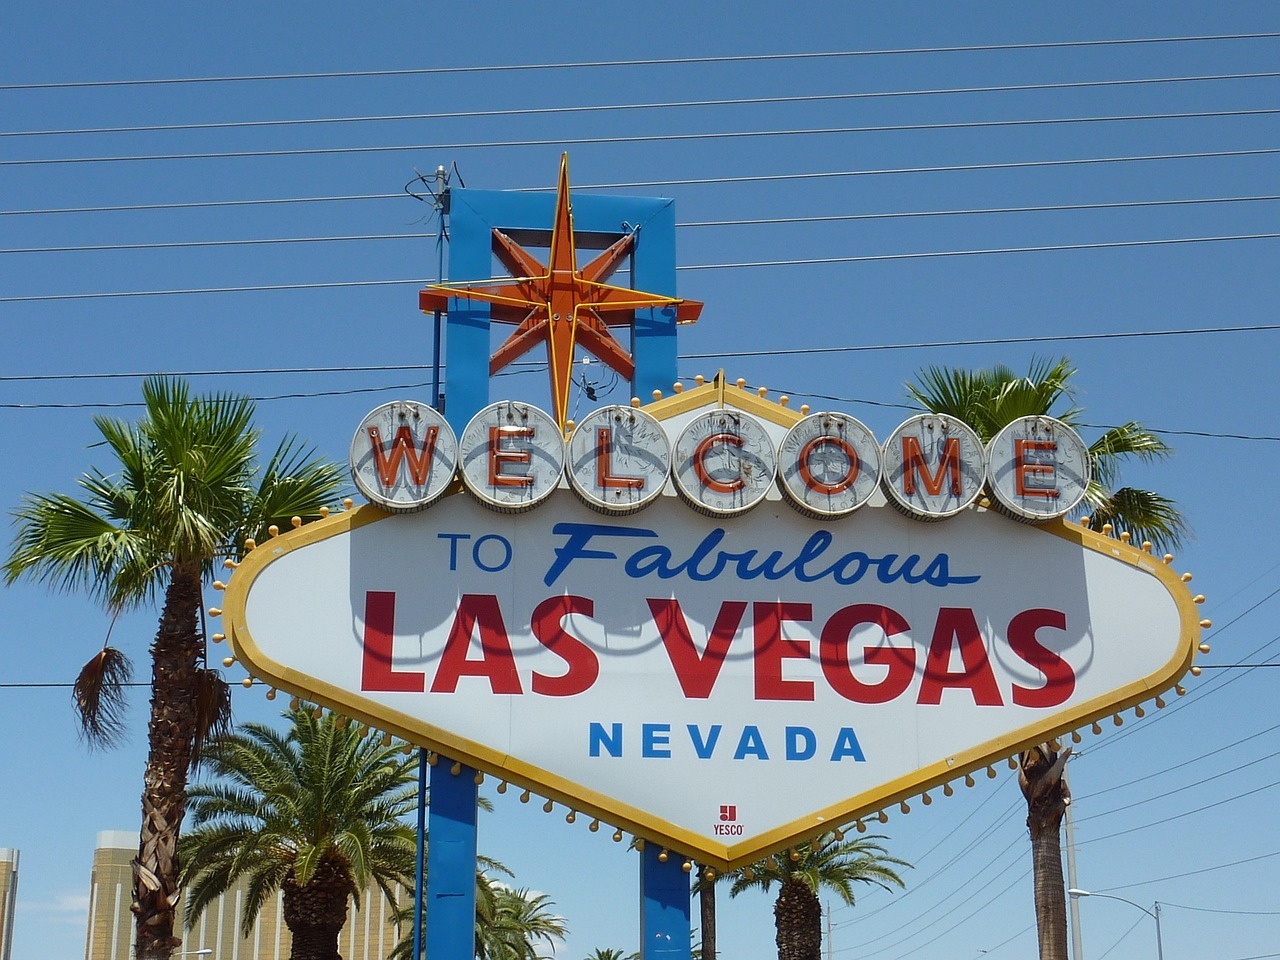 Want More Fun While Travelling? Here's How to Have the Most Fun in States With Casinos